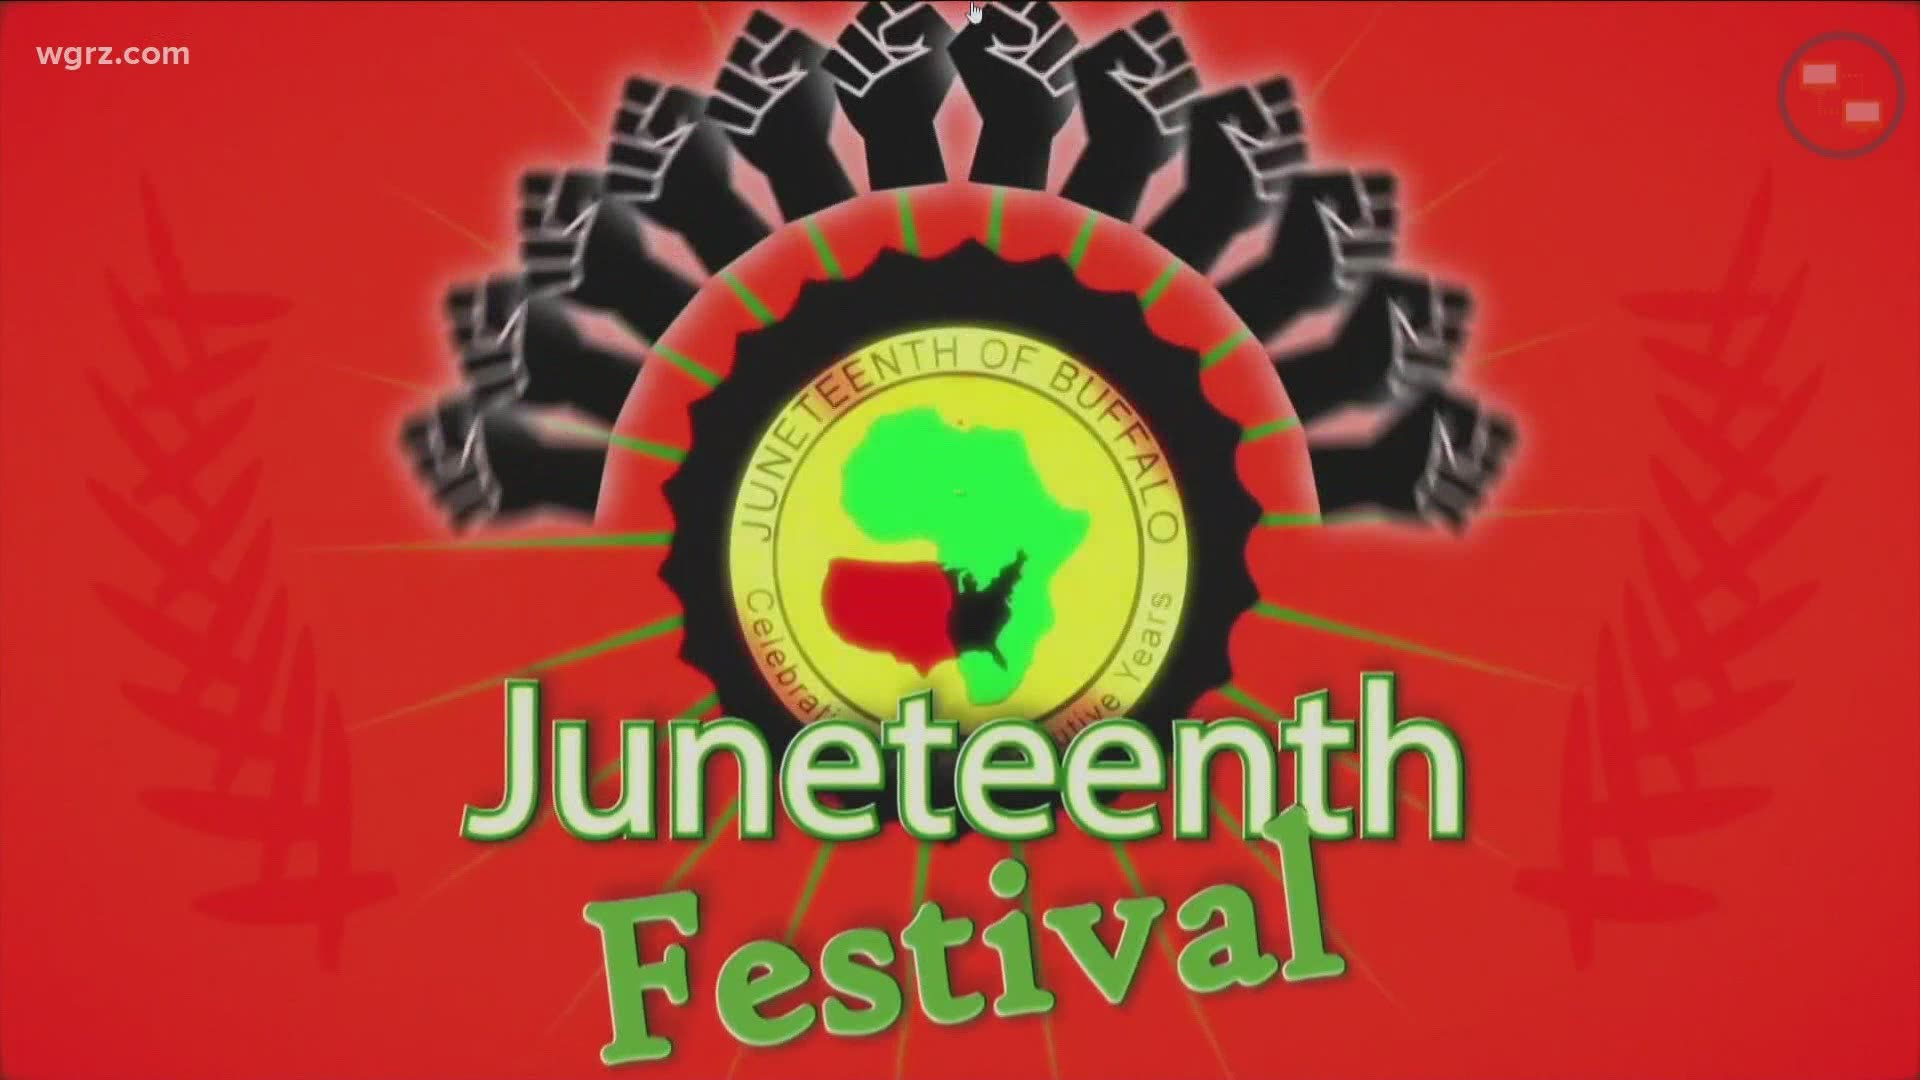 The 46th Juneteenth Festival of Buffalo was virtual.
There was no parade, but a lot of elements online.